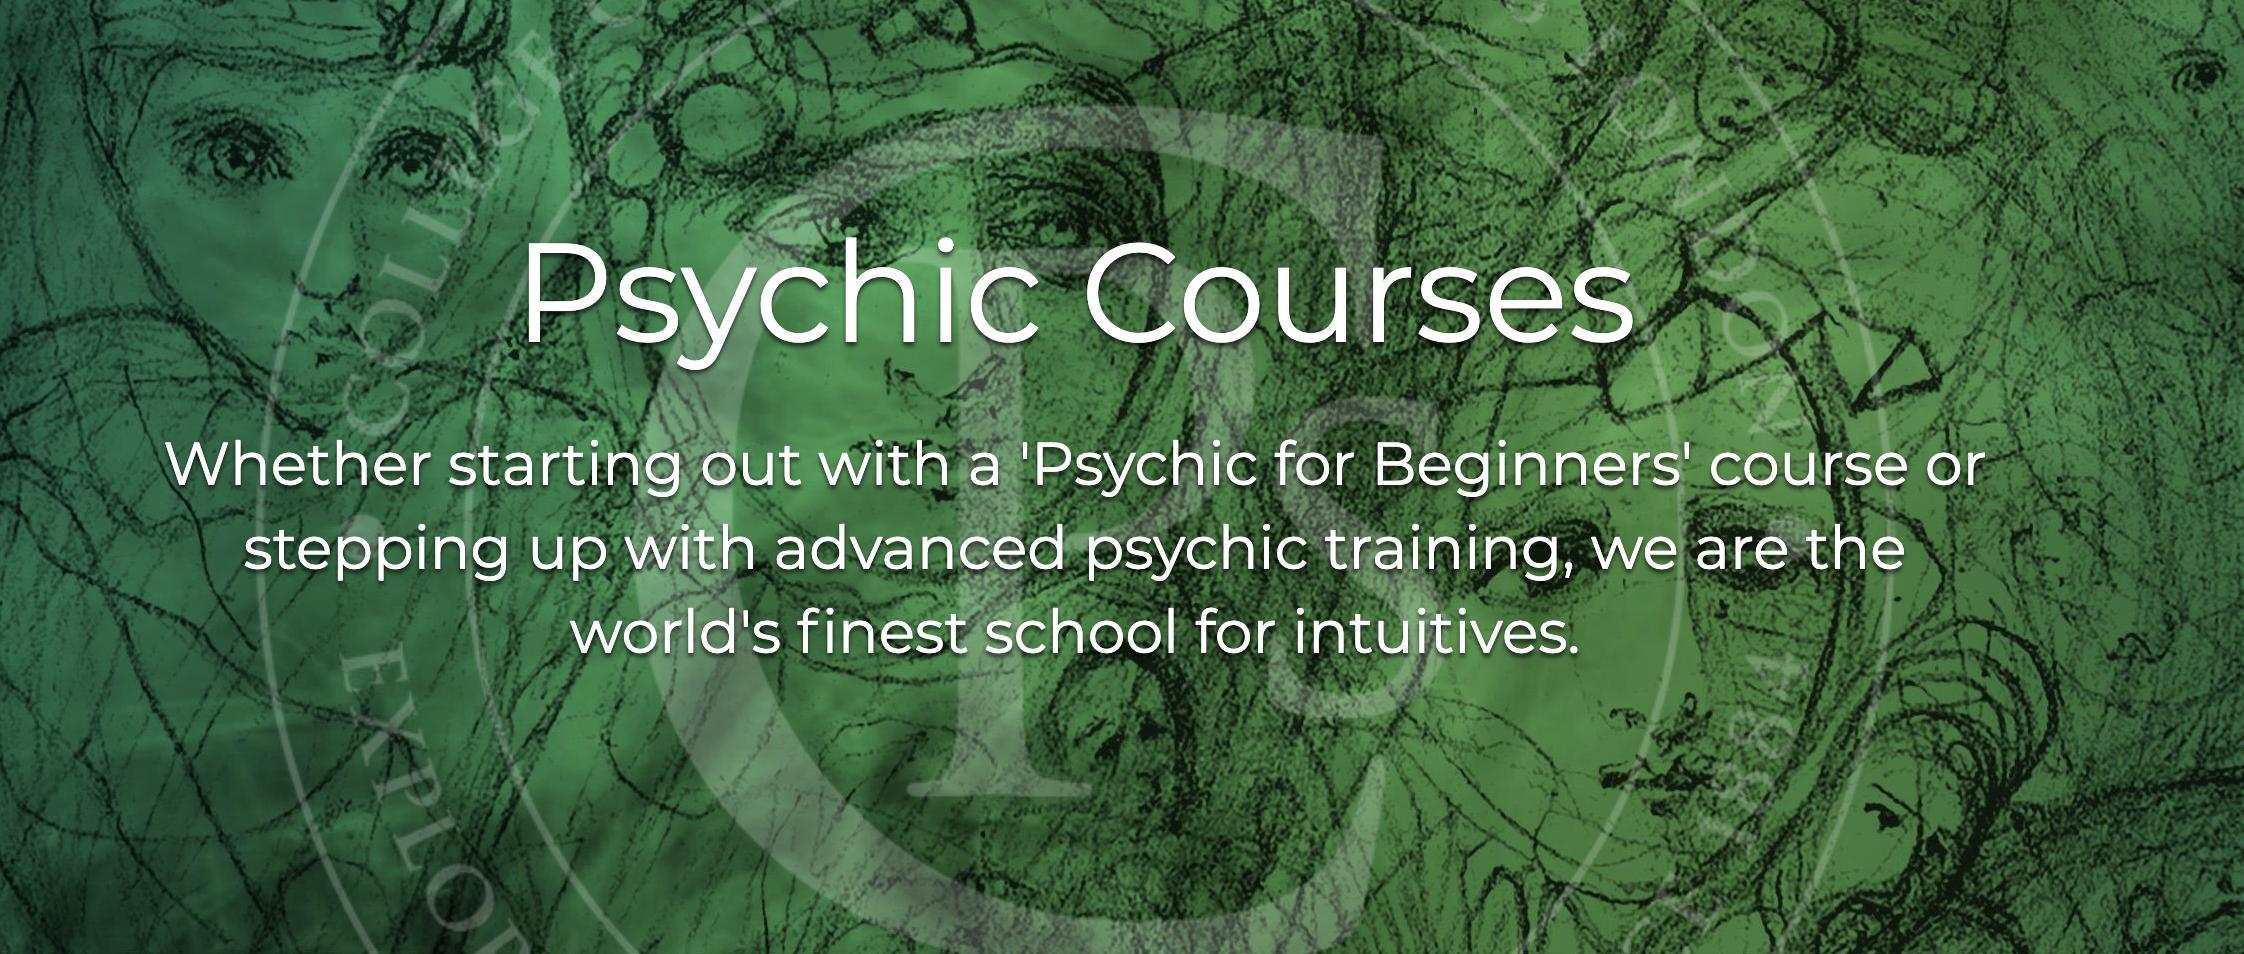 Link to psychic courses